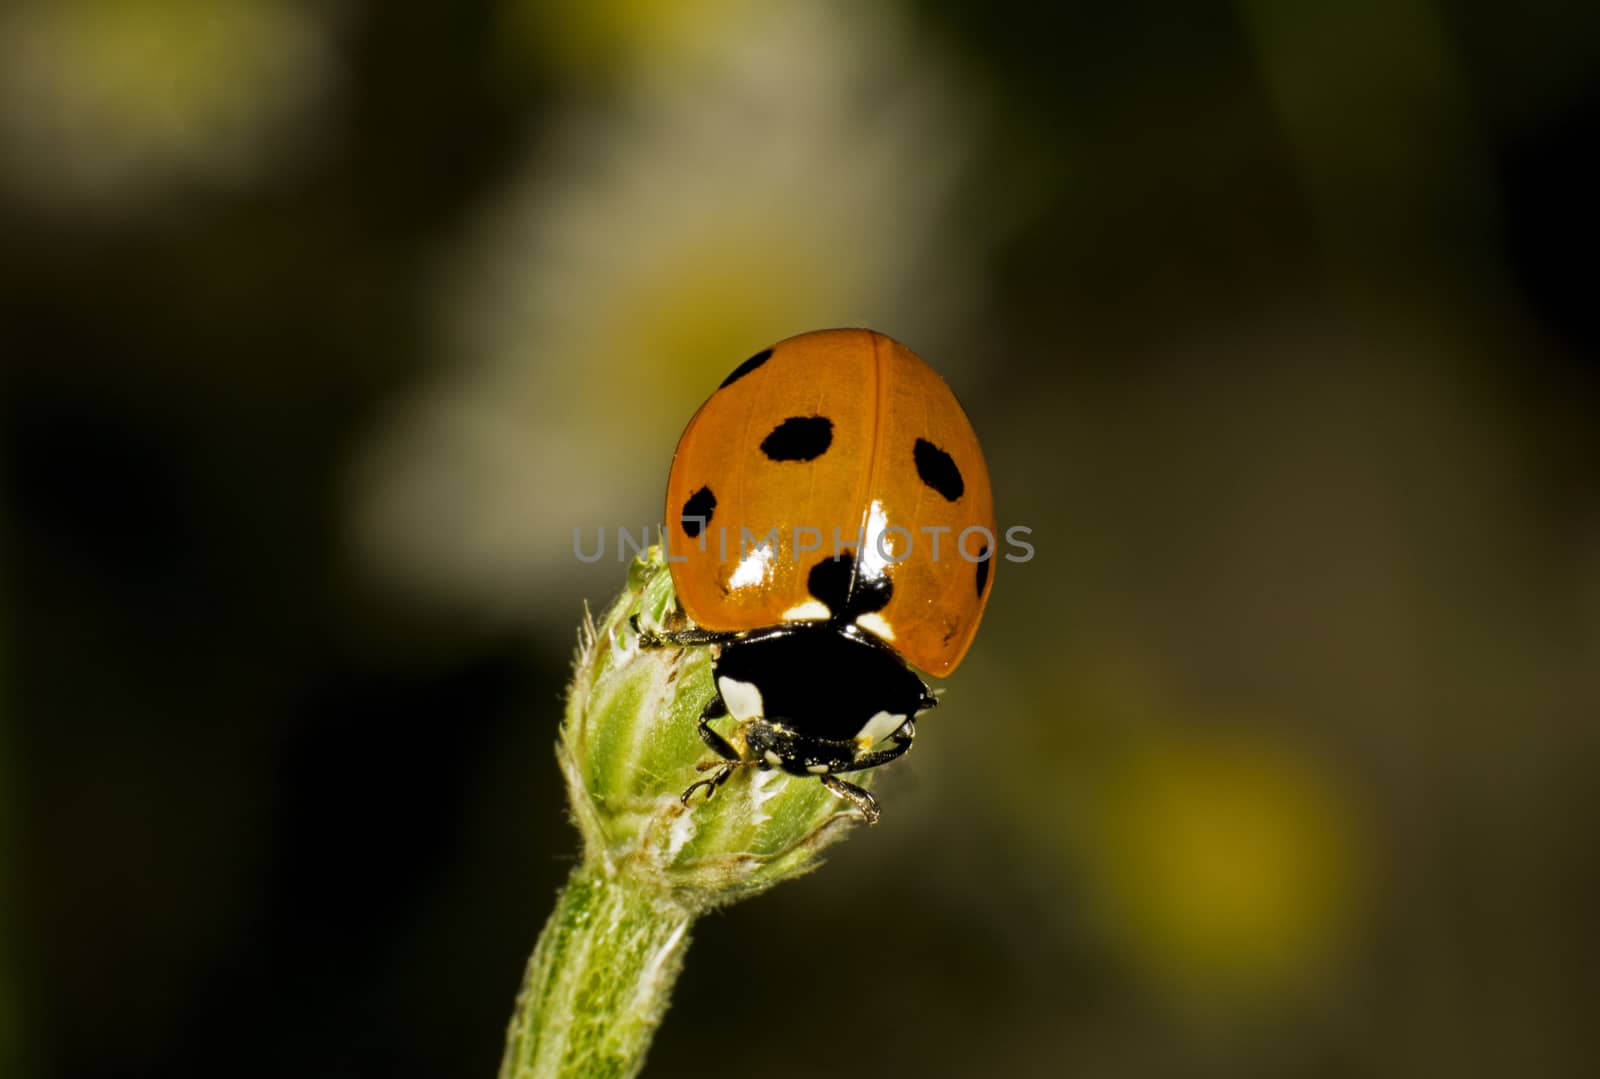 Red Ladybug by thomas_males